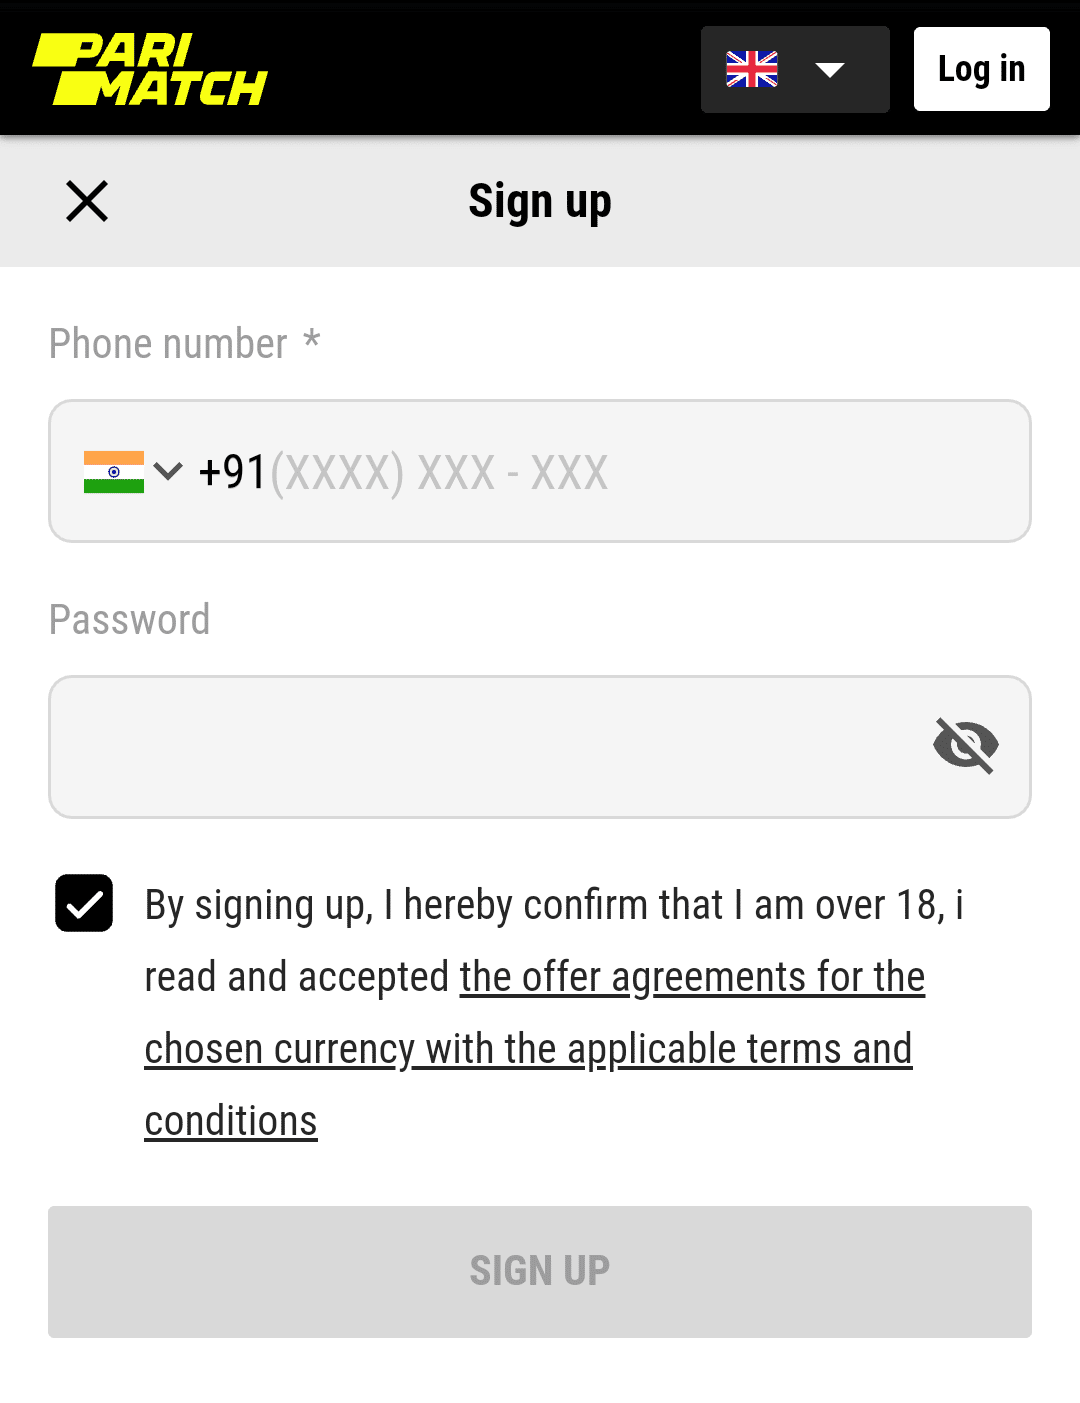 Sign up interface on mobile